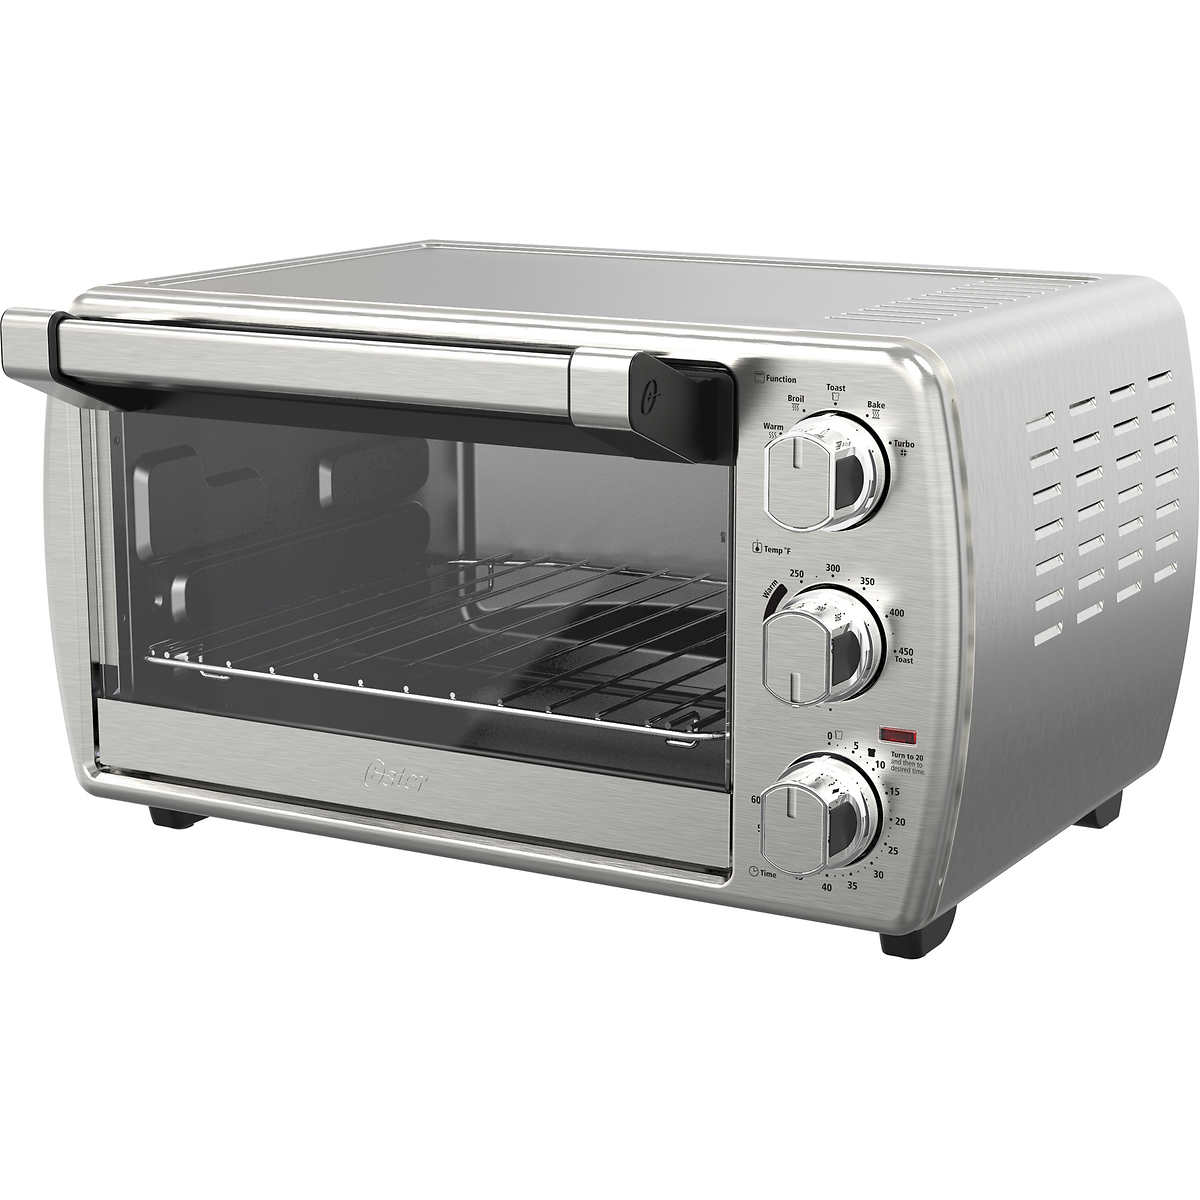 Oster Countertop Convection Oven, Countertop Convection Microwave Oven Stainless Steel